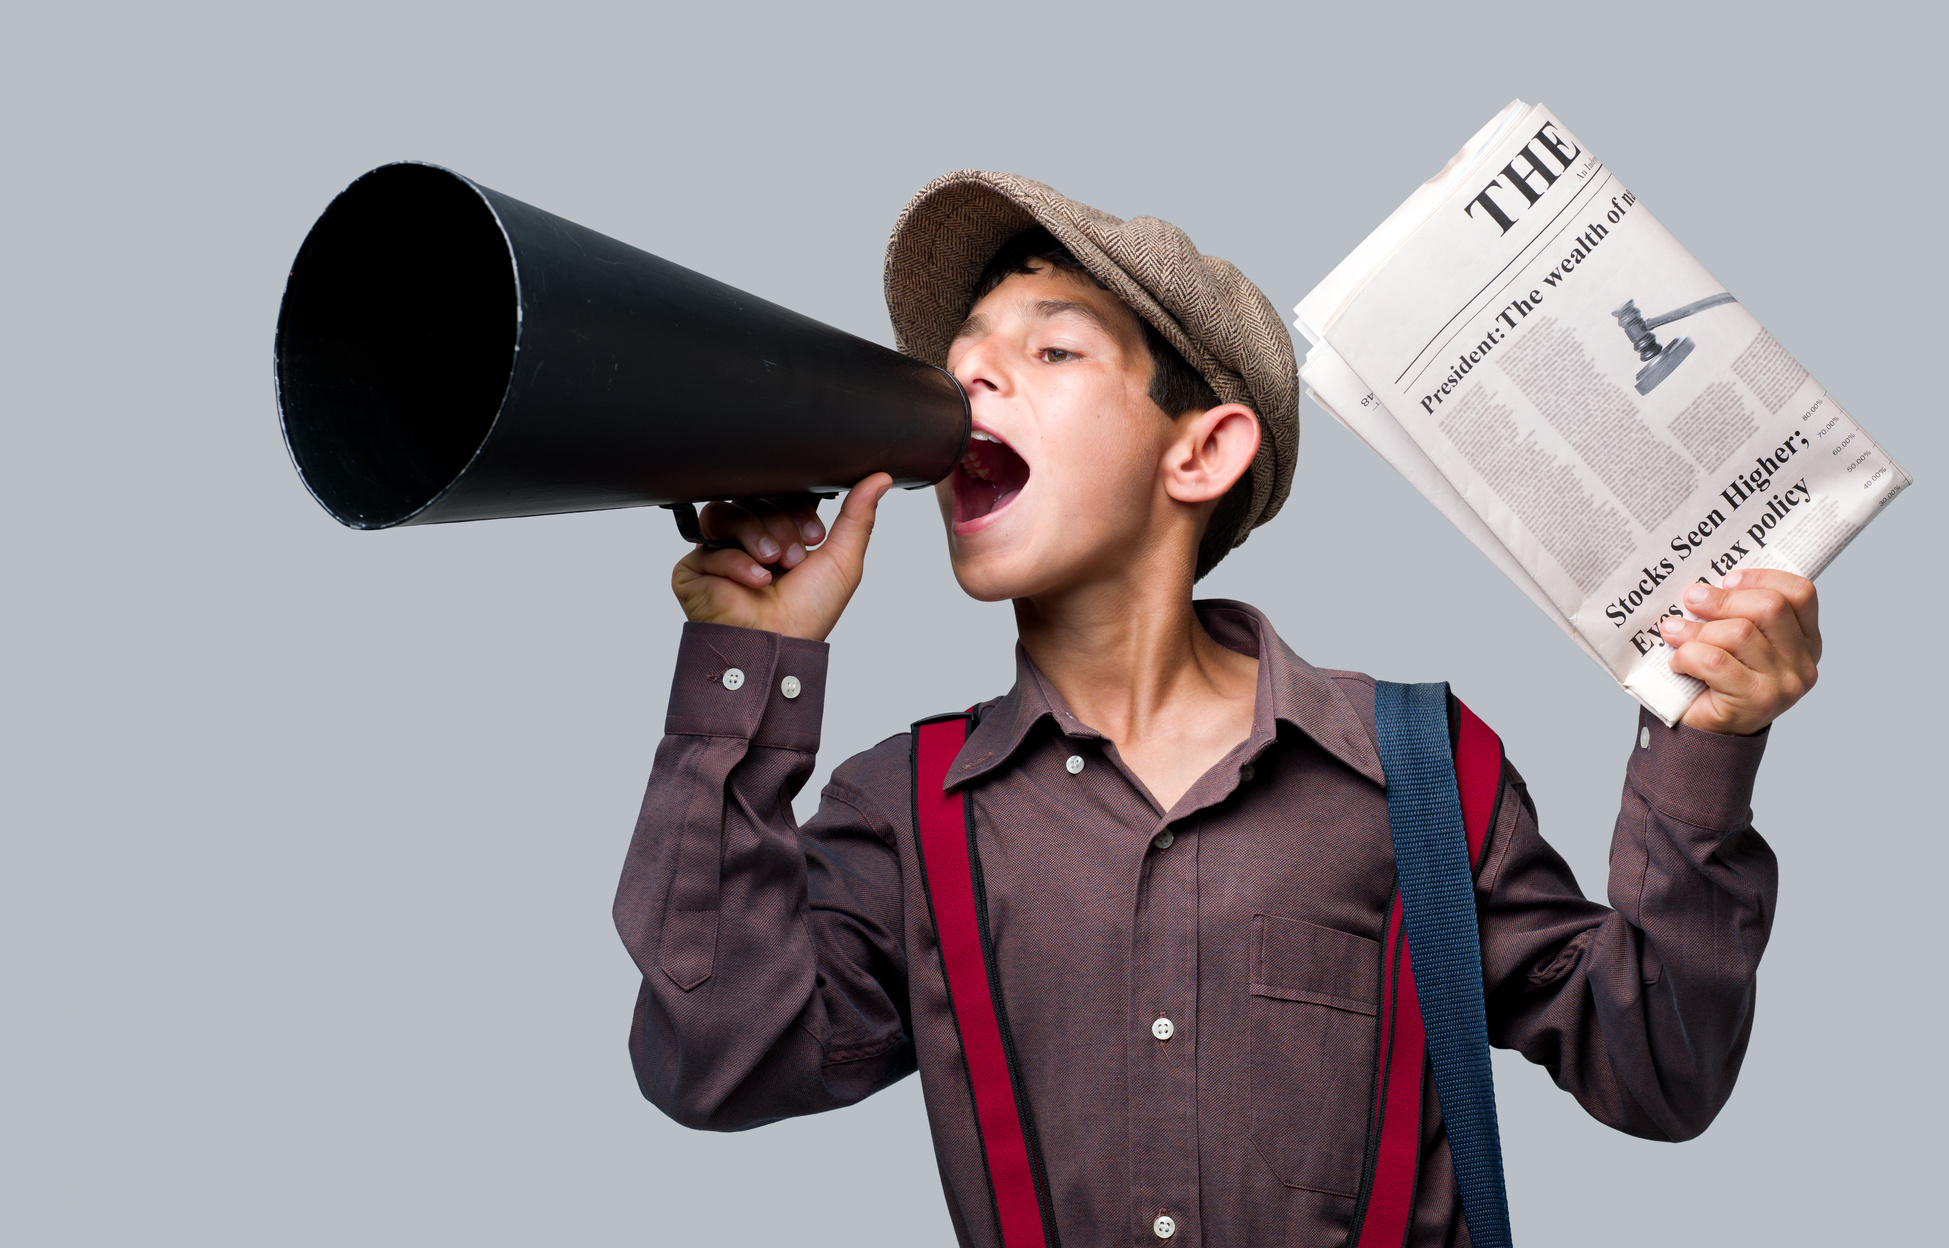 Newsboy holding newspaper and shouting to sell